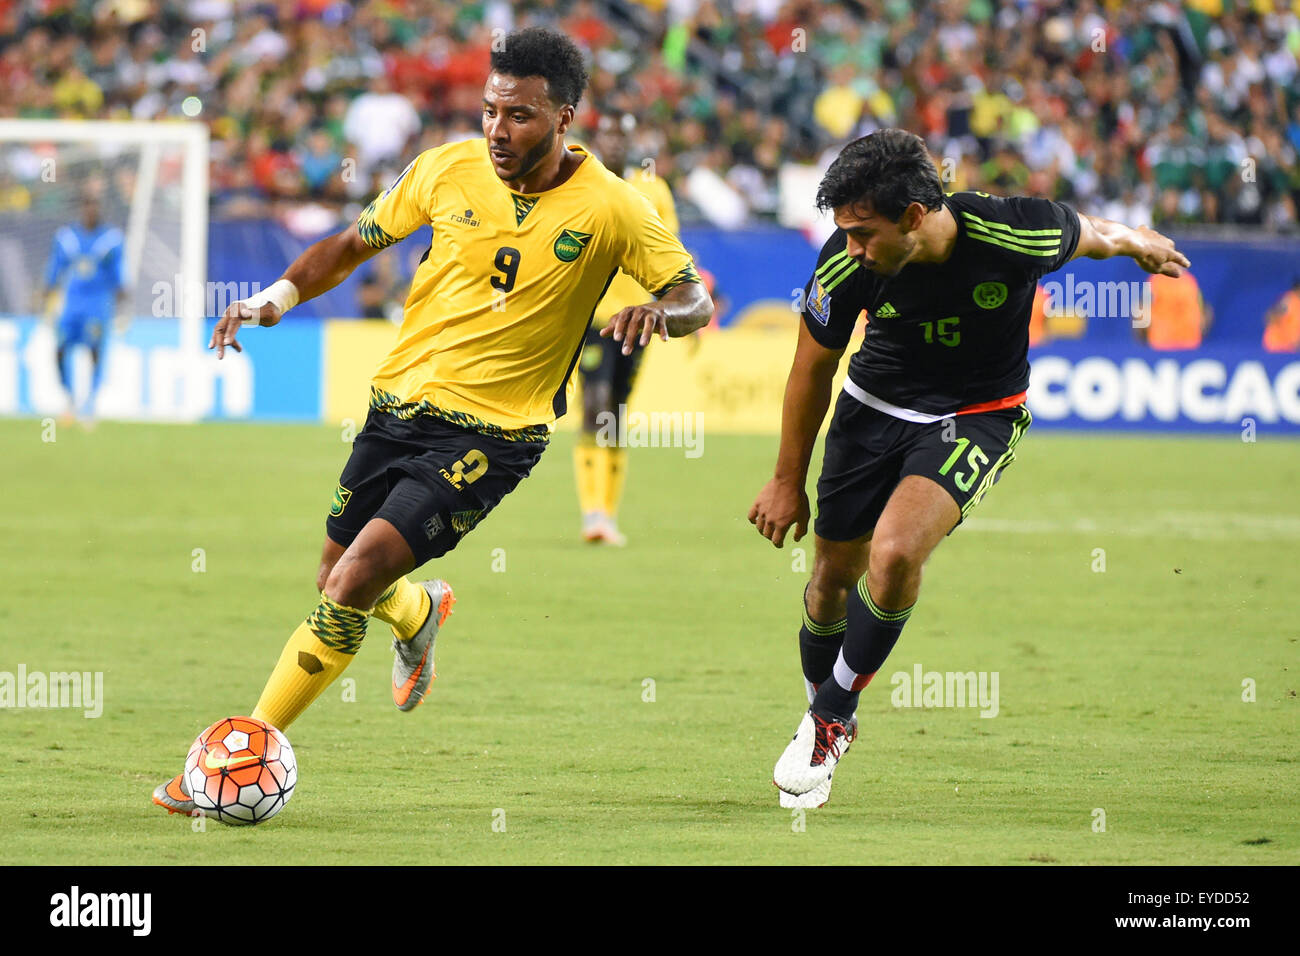 Philadelphia, Pennsylvania, USA. 26th July, 2015. Jamaica forward Giles Barnes #9 controls the ball against the defense of Mexico defender Hector Moreno #15 during the 2015 CONCACAF Gold Cup final between Jamaica and Mexico at Lincoln Financial Field in Philadelphia, Pennsylvania. Mexico defeated Jamaica 3-1. Rich Barnes/CSM/Alamy Live News Stock Photo